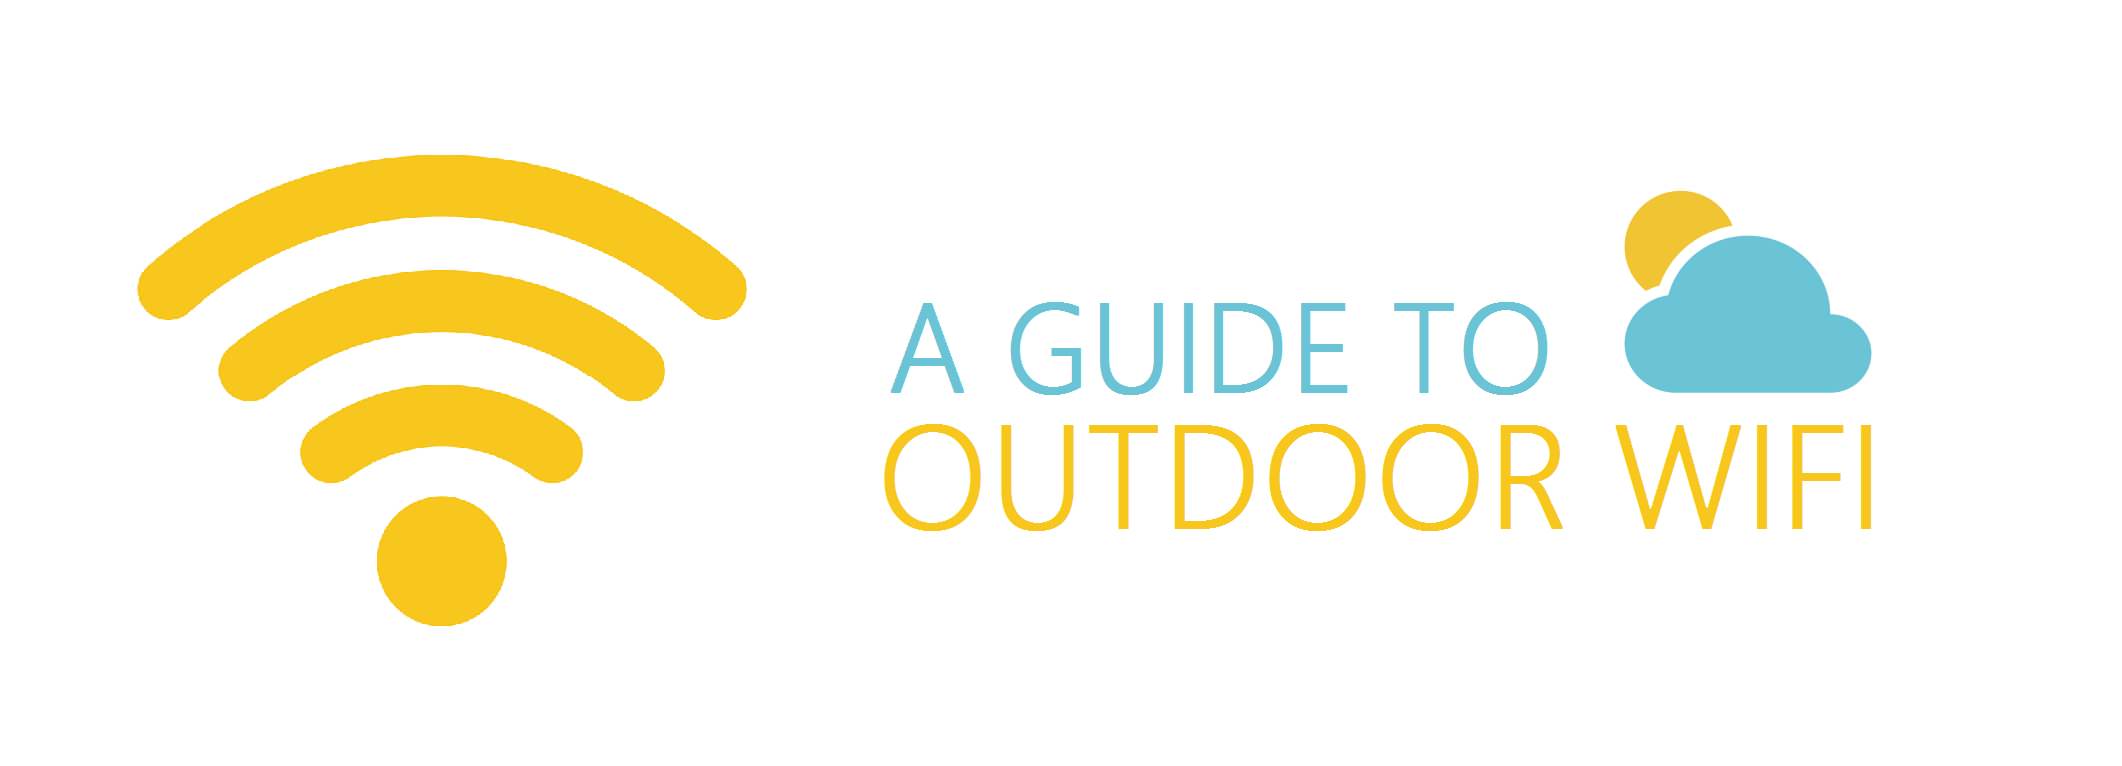 outdoor wifi guide title